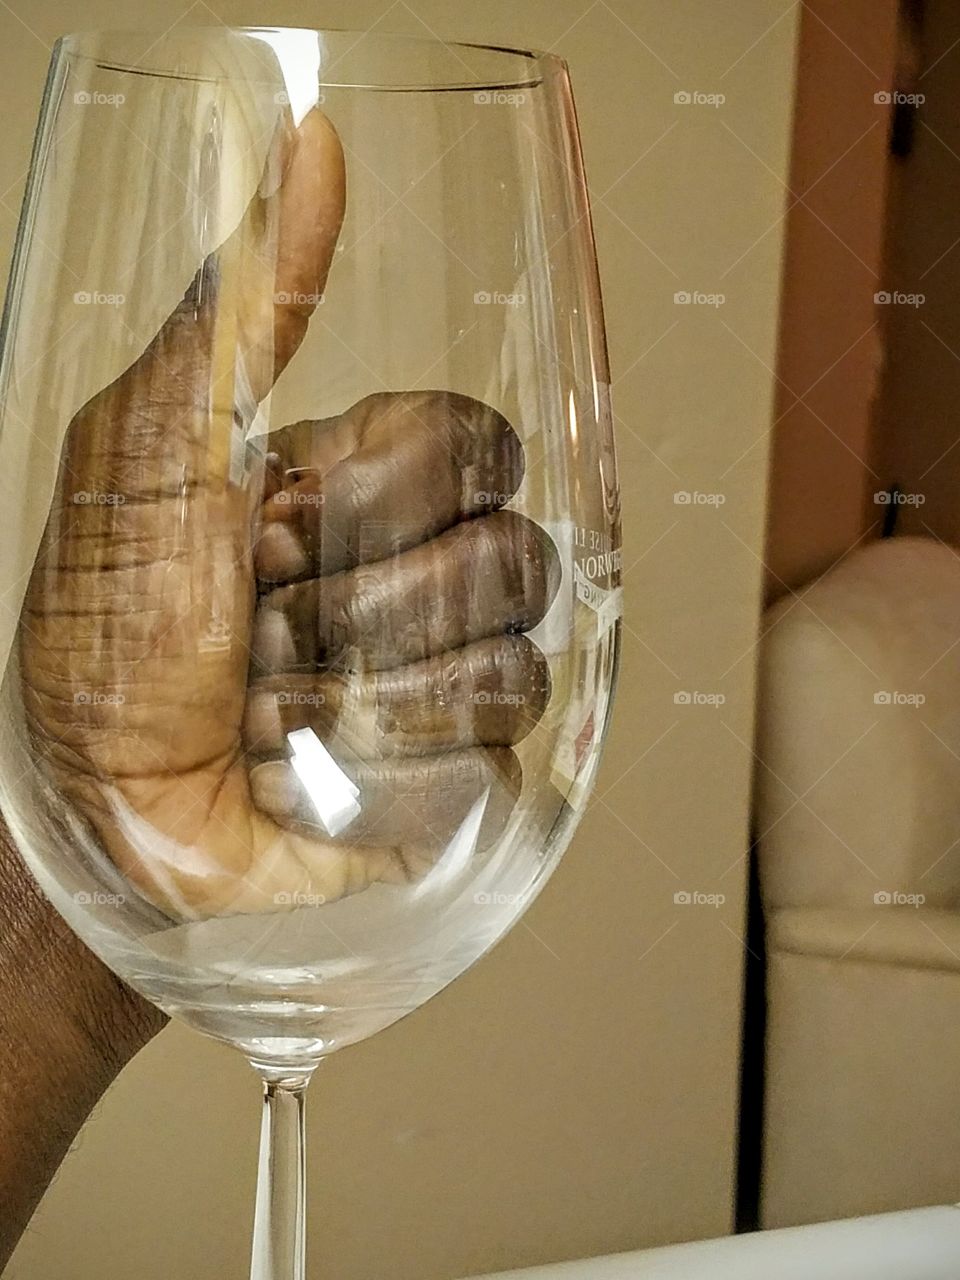 Cool glass thumps up